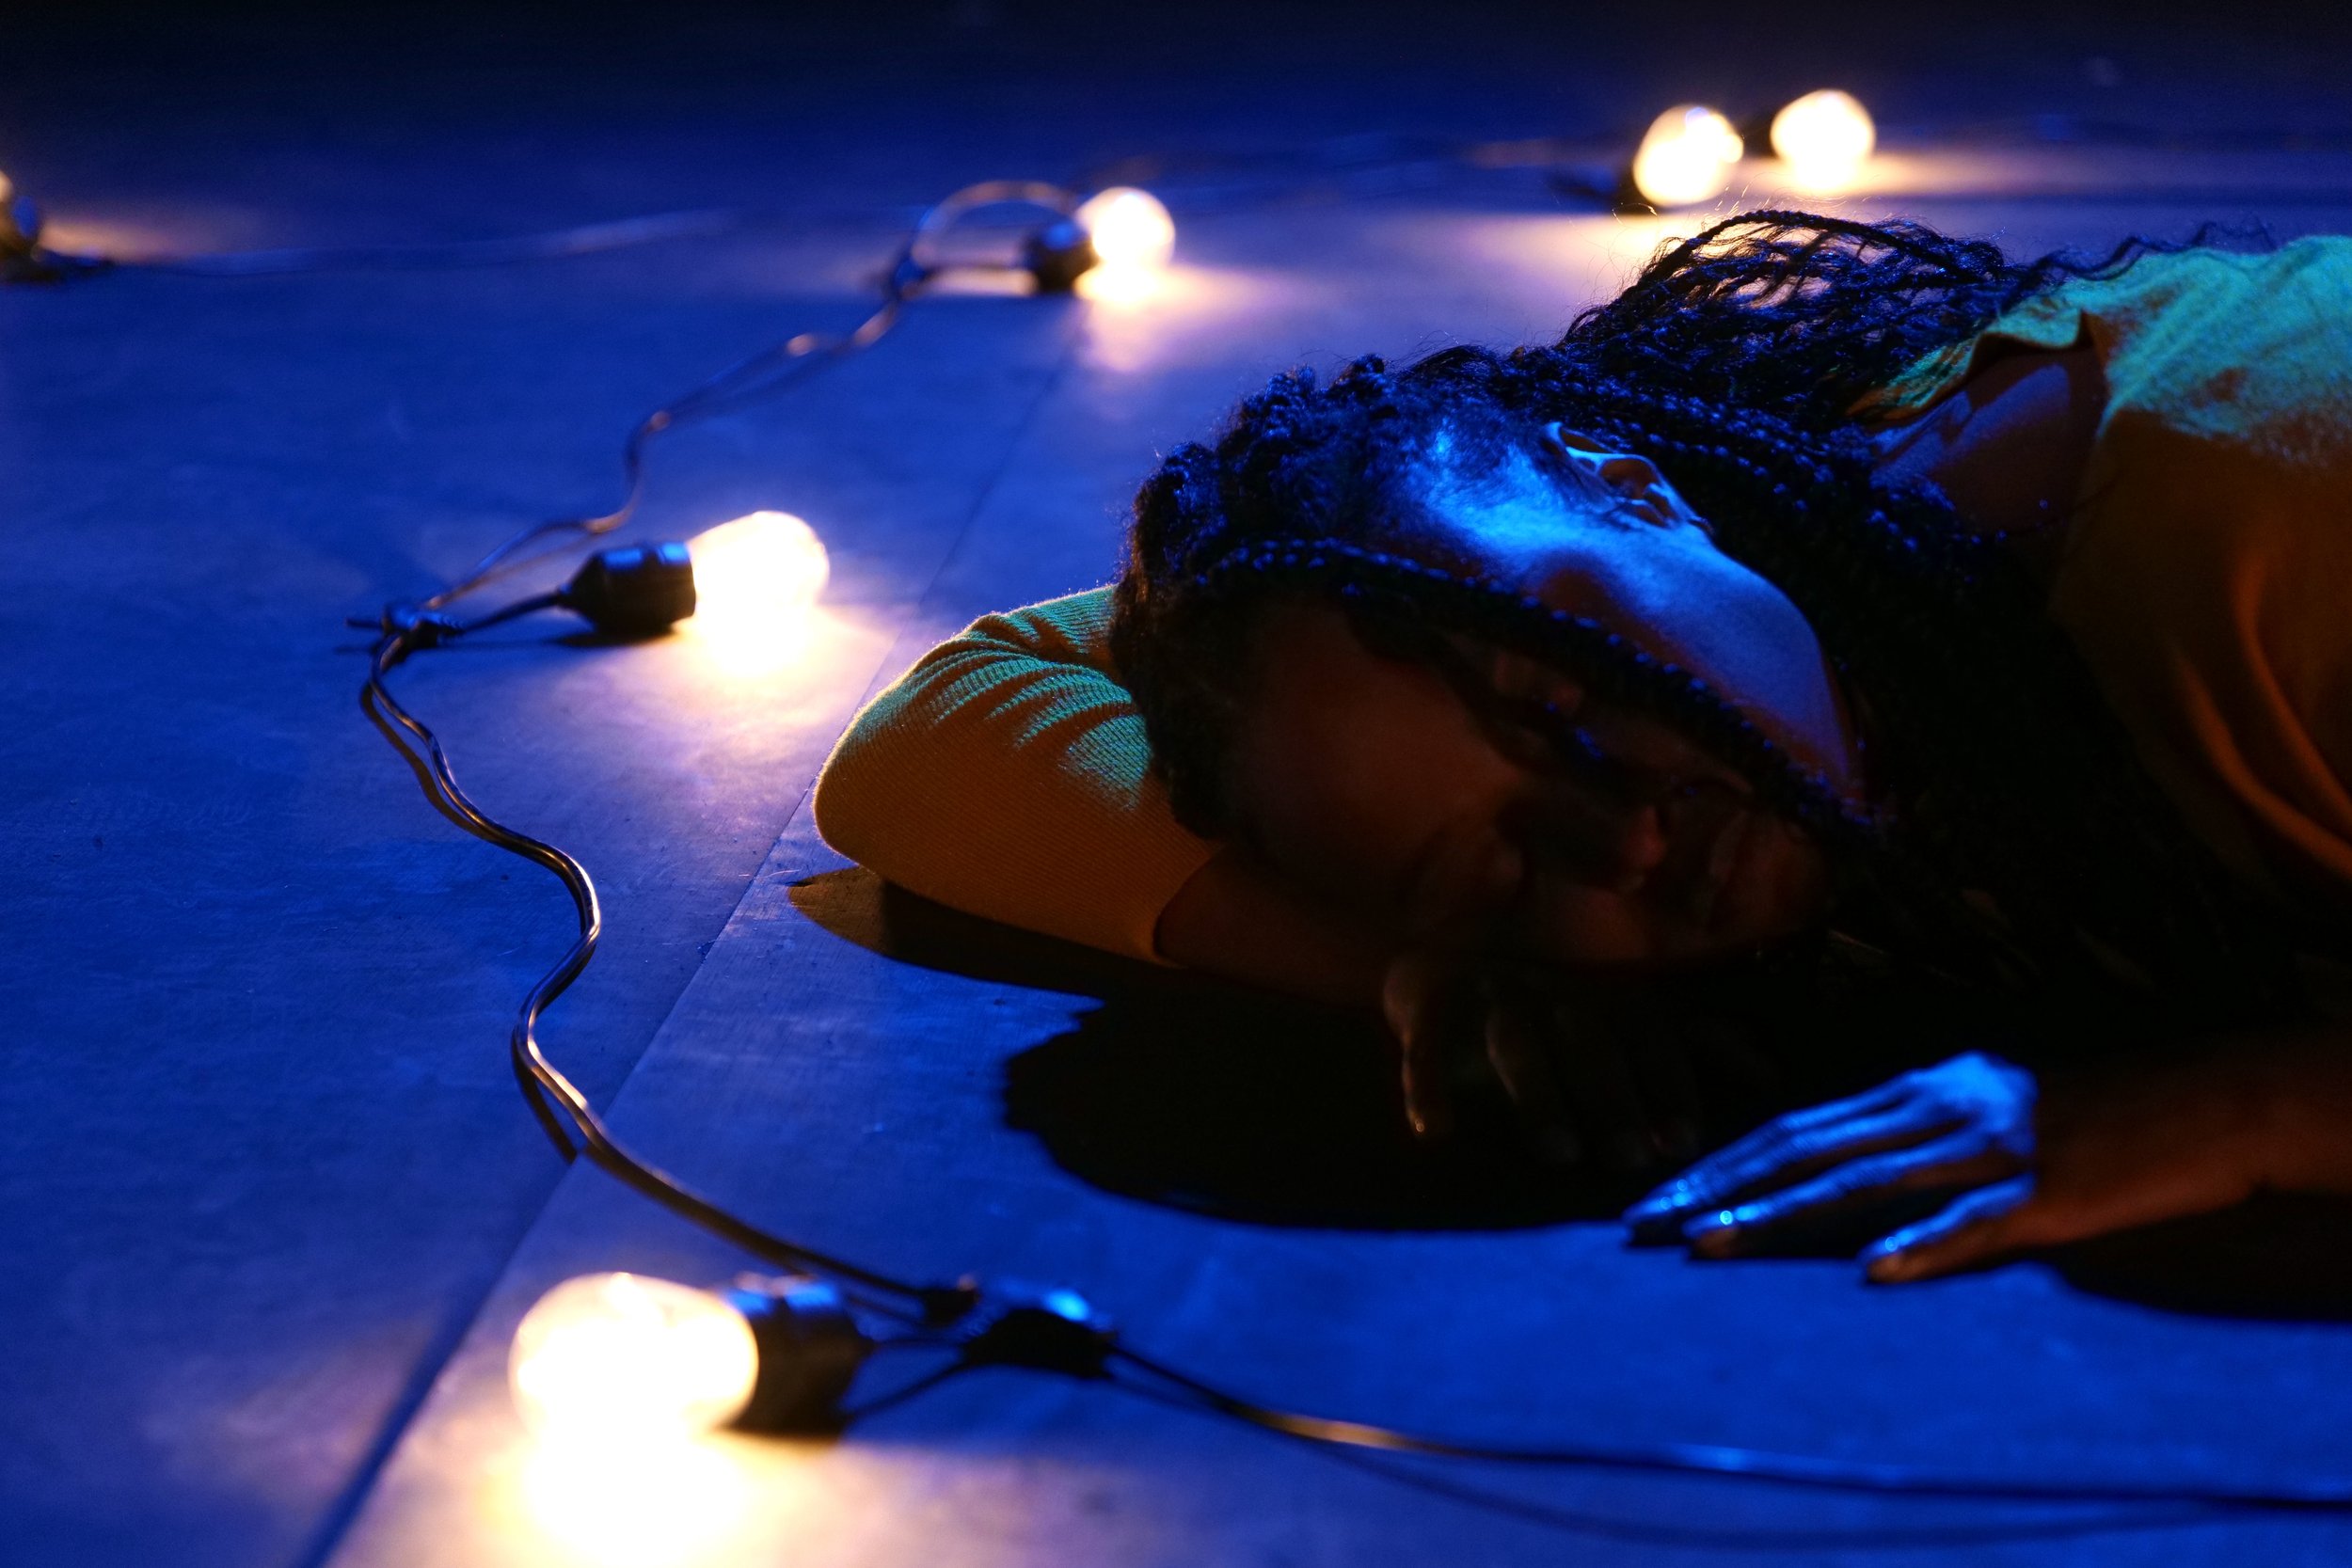  Photo Credit: Ryd Cook  A black woman lies on the floor, head turned to the side toward the viewer. In front of her, a string of lightbulbs illuminate the floor around her. 